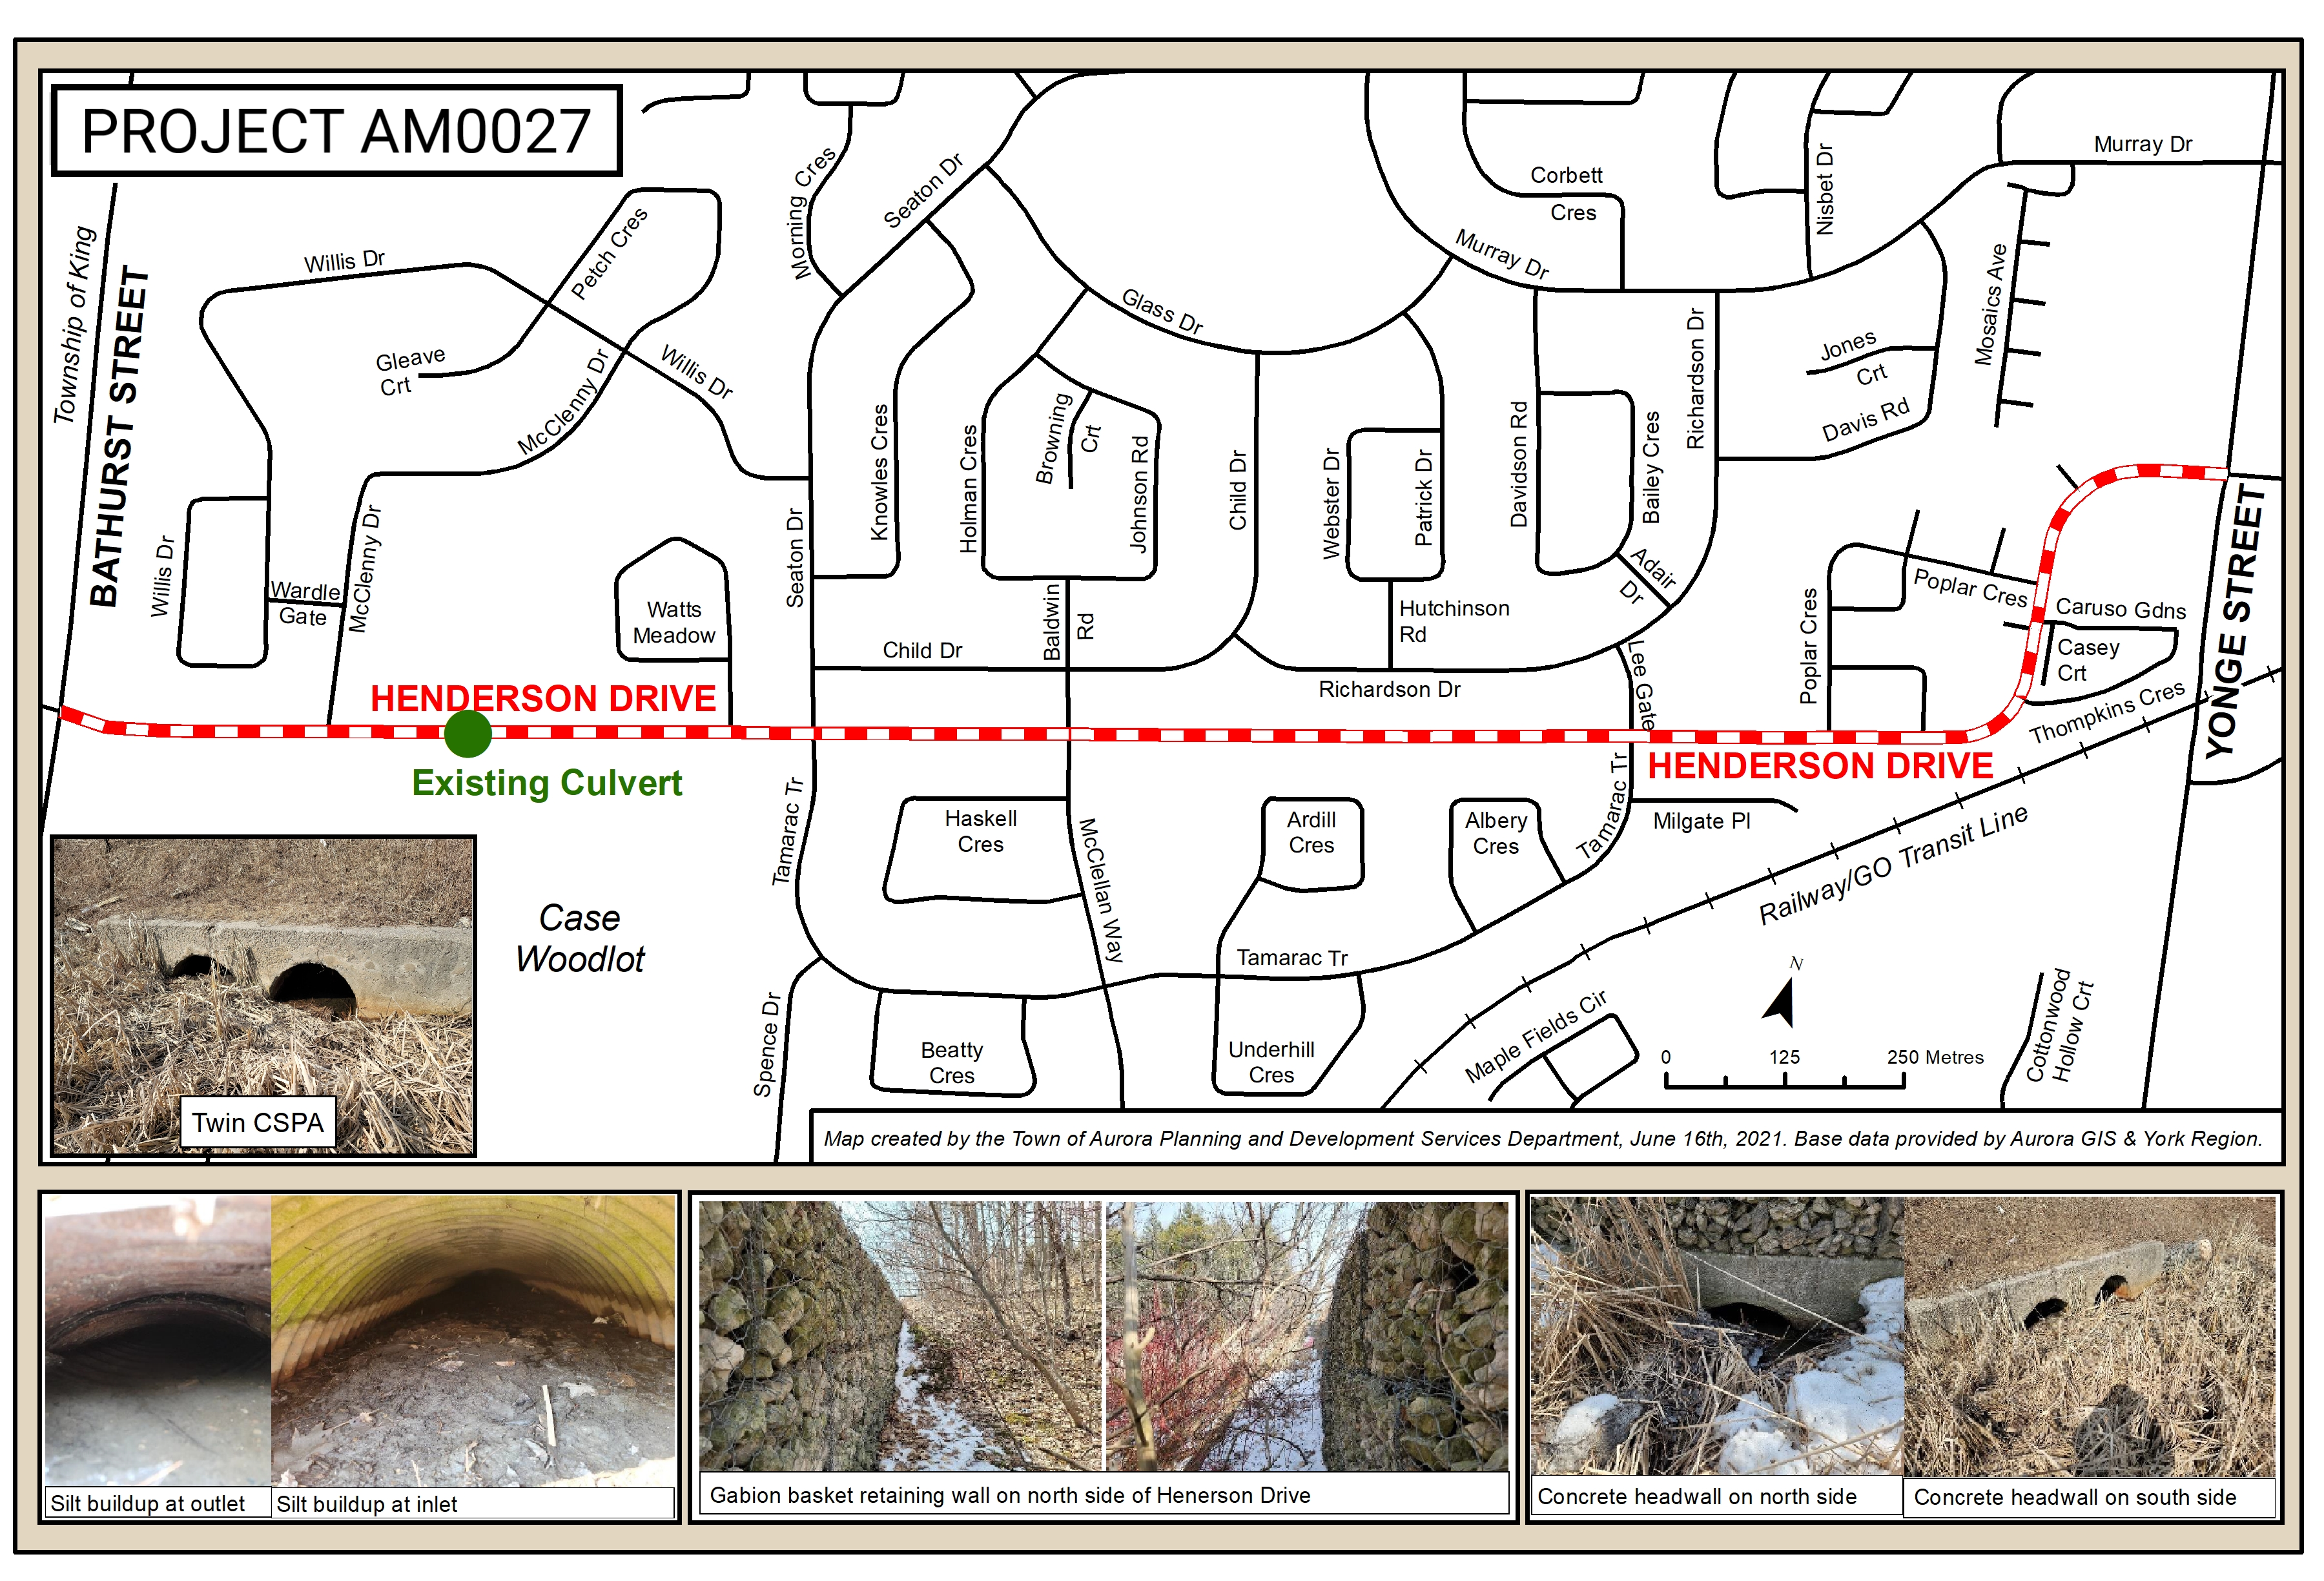 Wildlife Tunnel and Culvert map and photos